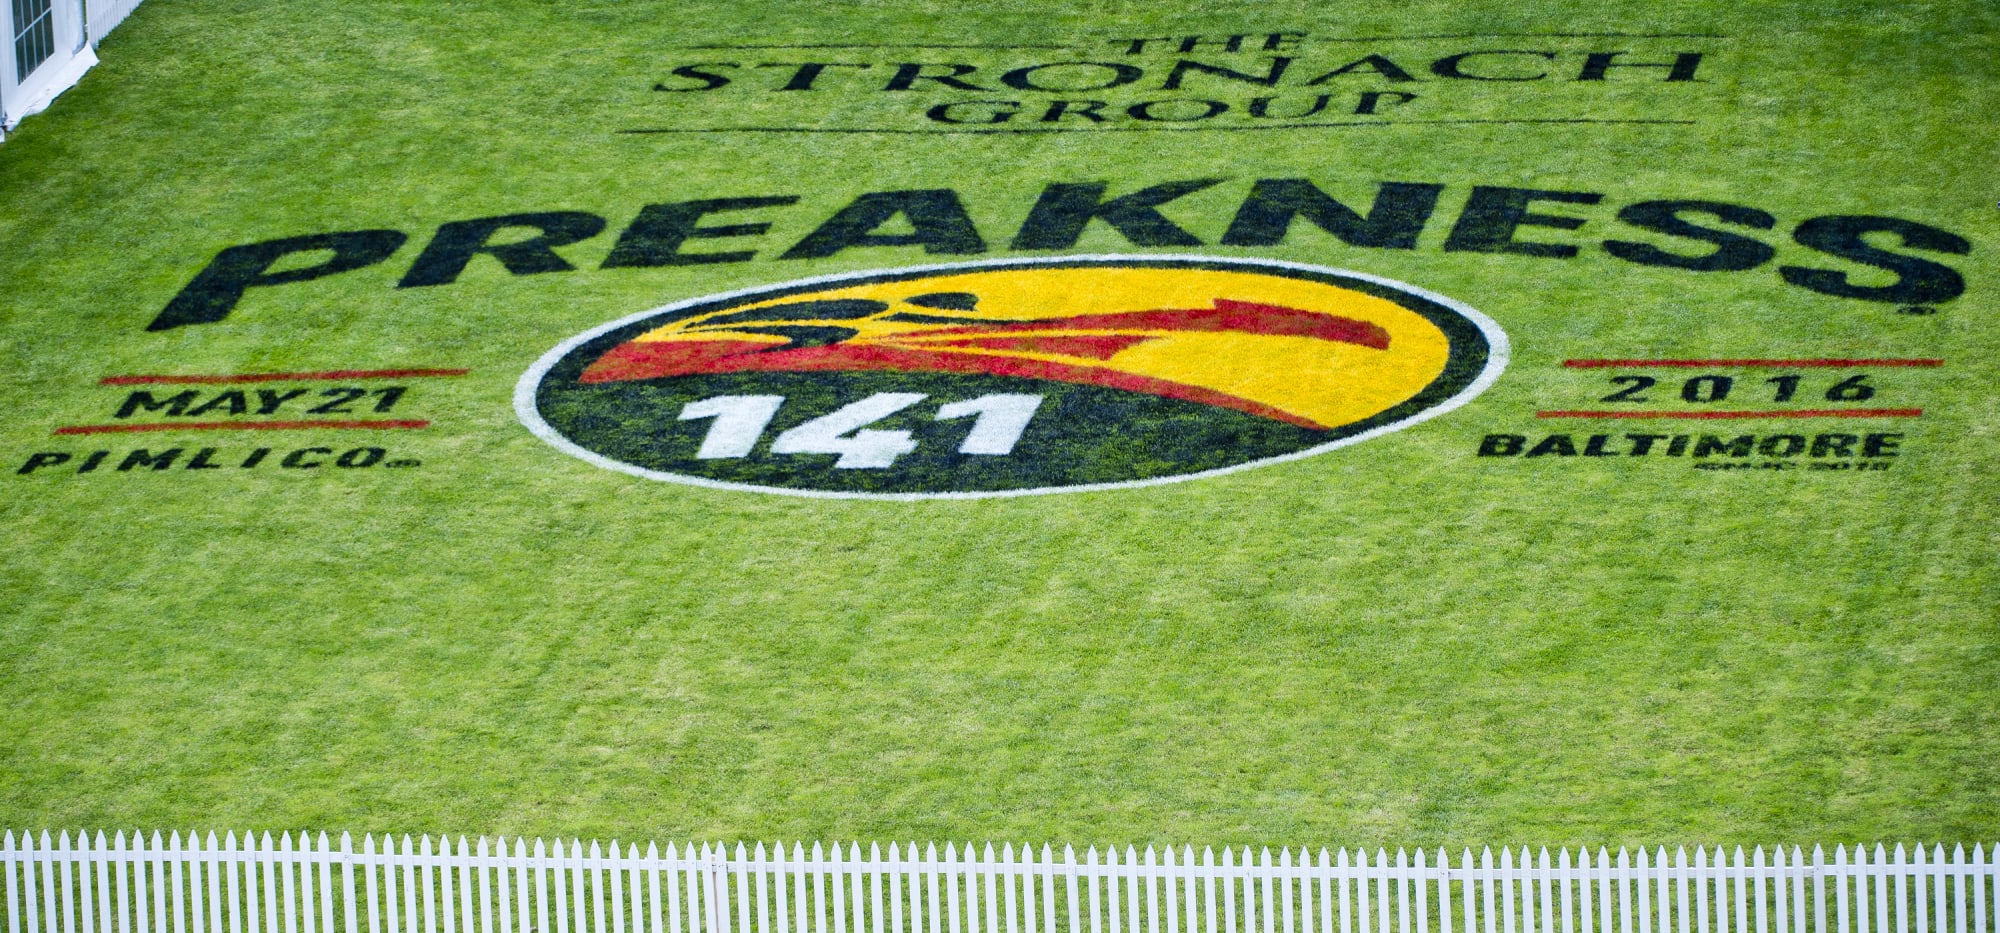 Preakness Stakes 2016 Live stream, odds, TV schedule and more